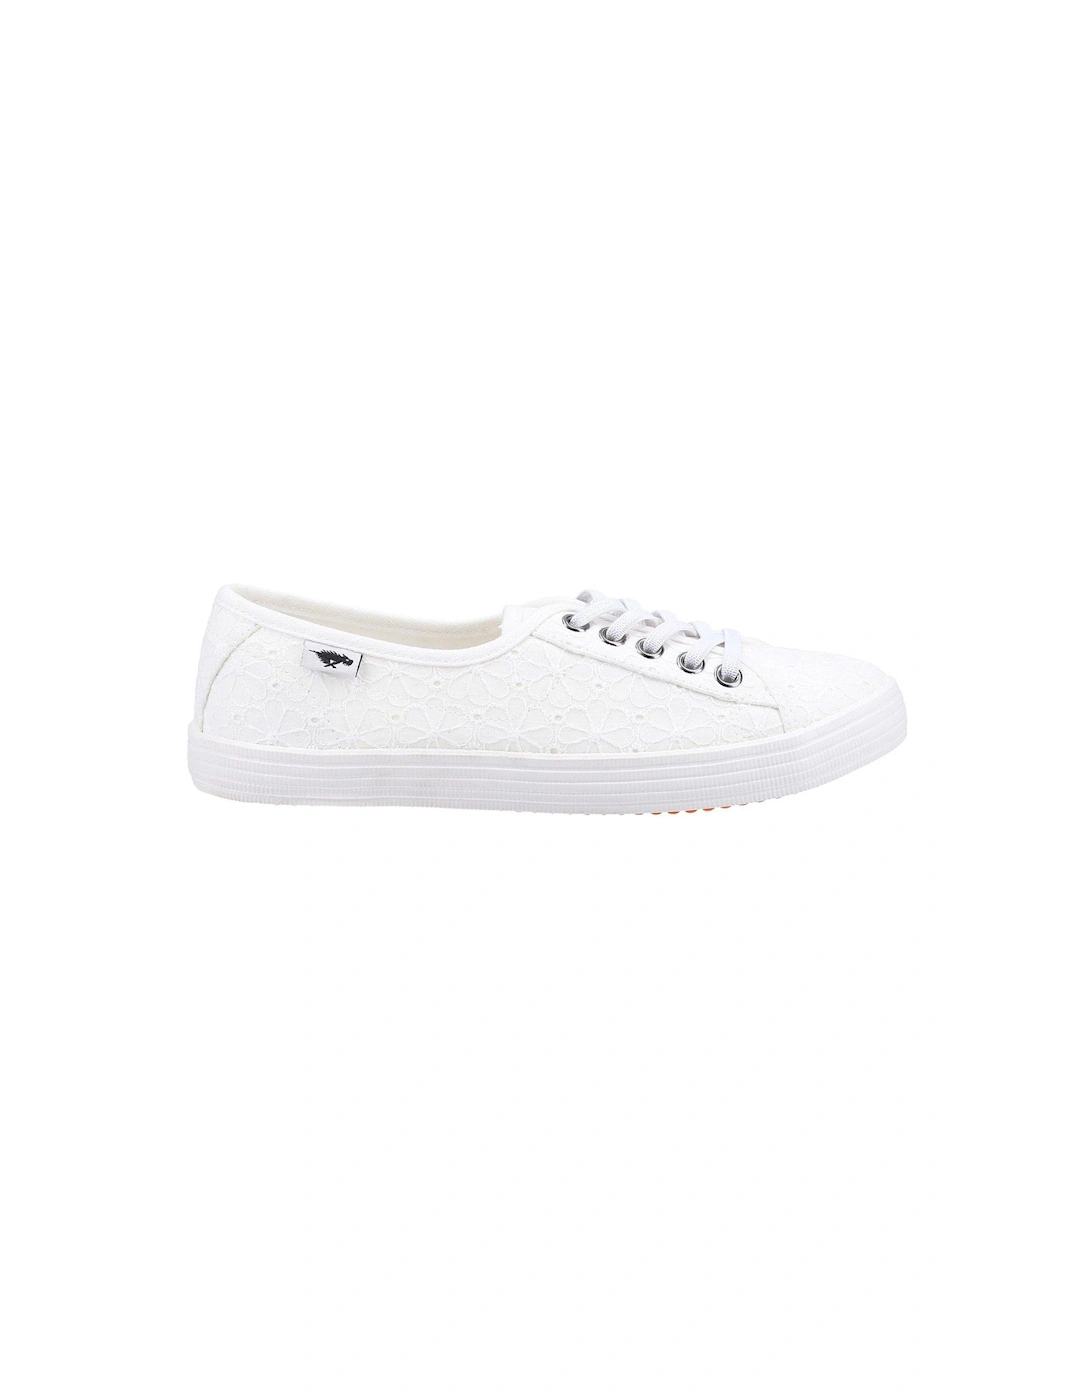 Chow Chow Summer Jersey Plimsolls - White, 5 of 4